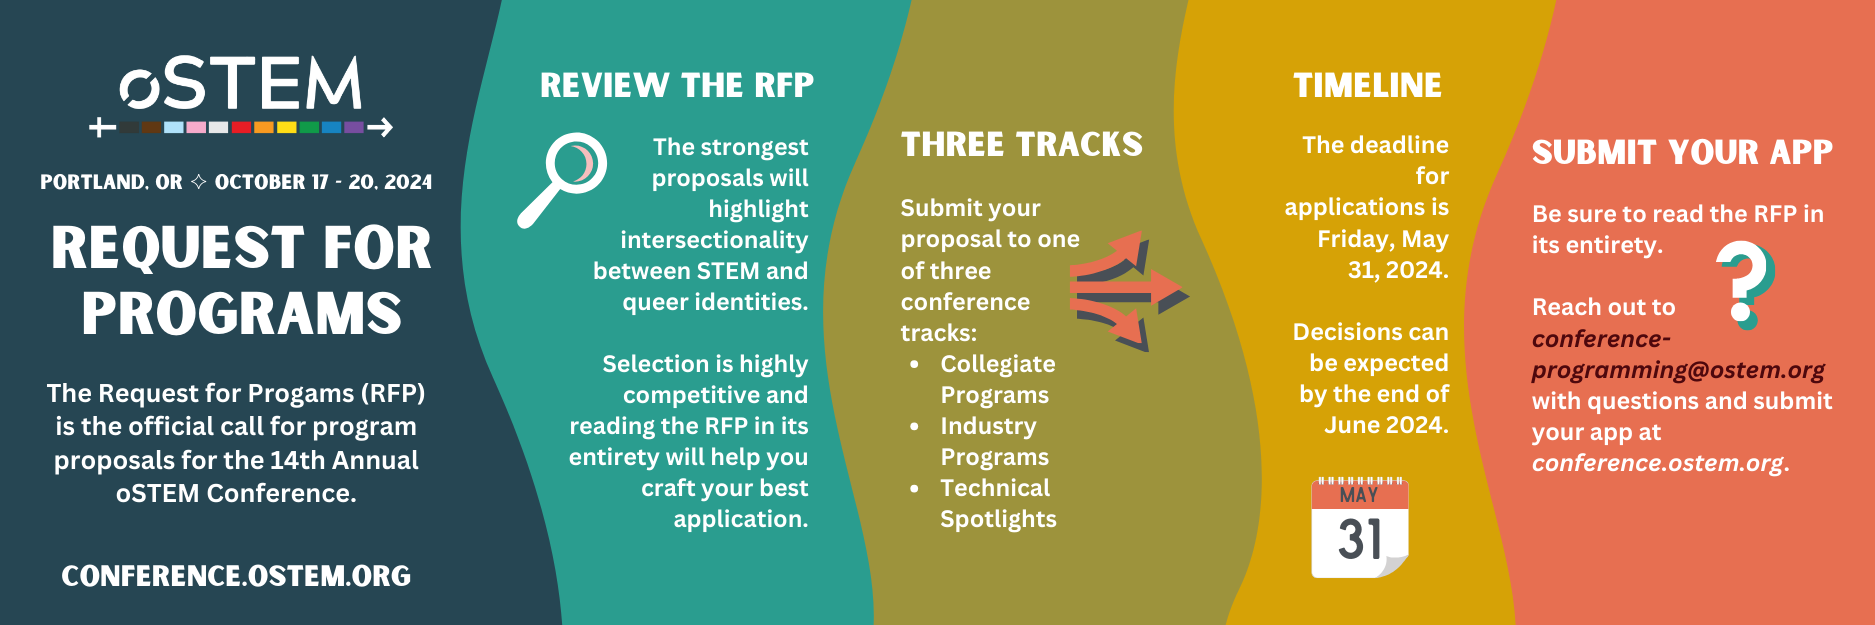 Graphical timeline explaining the 2024 RFP process. There are four headers titled Review the RFP, Three Tracks, Timeline, and Submit your App respectively. Details for each of the headers are explained in the text sections below this image.